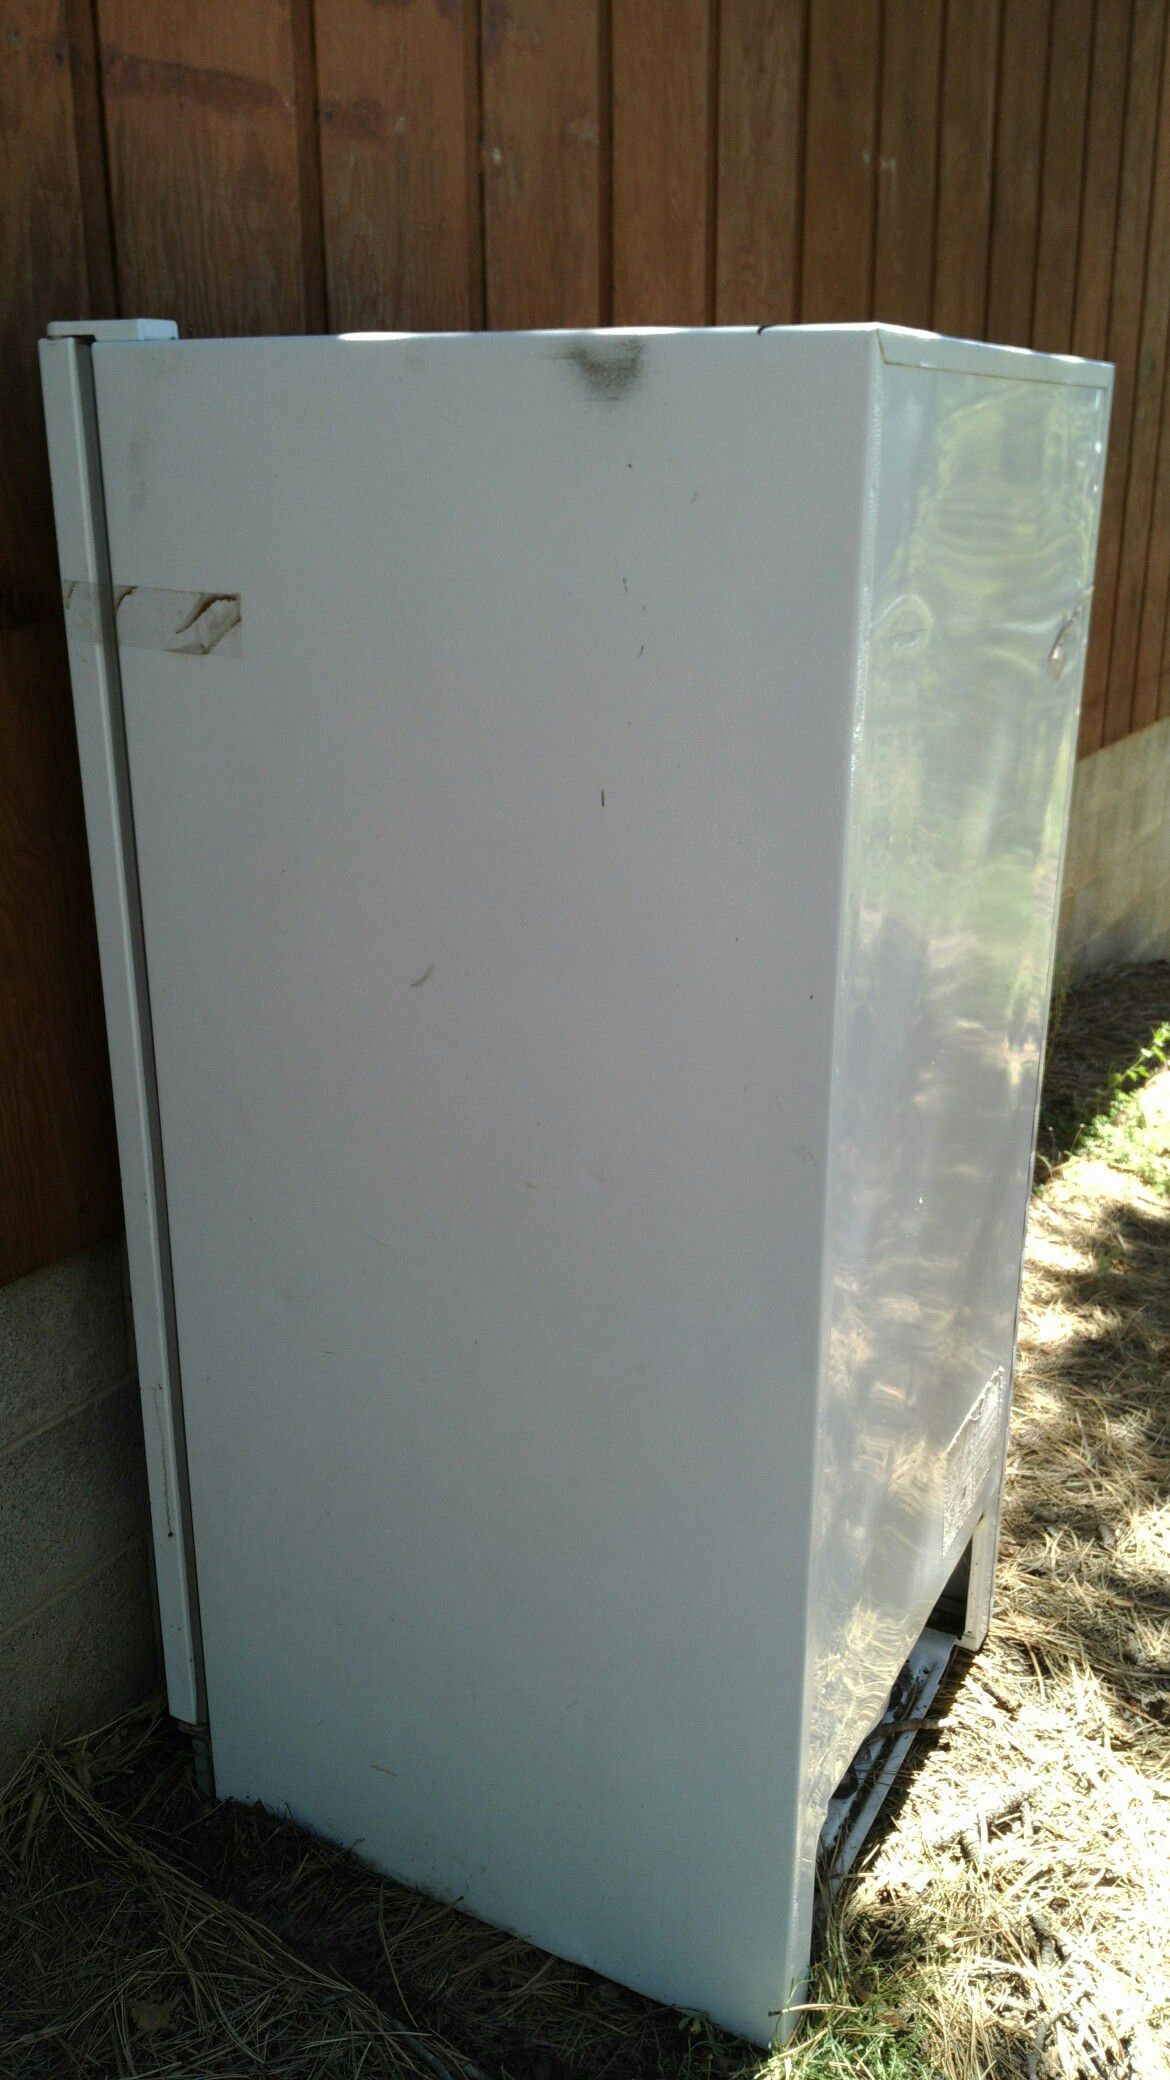 Tappin upright freezer not working